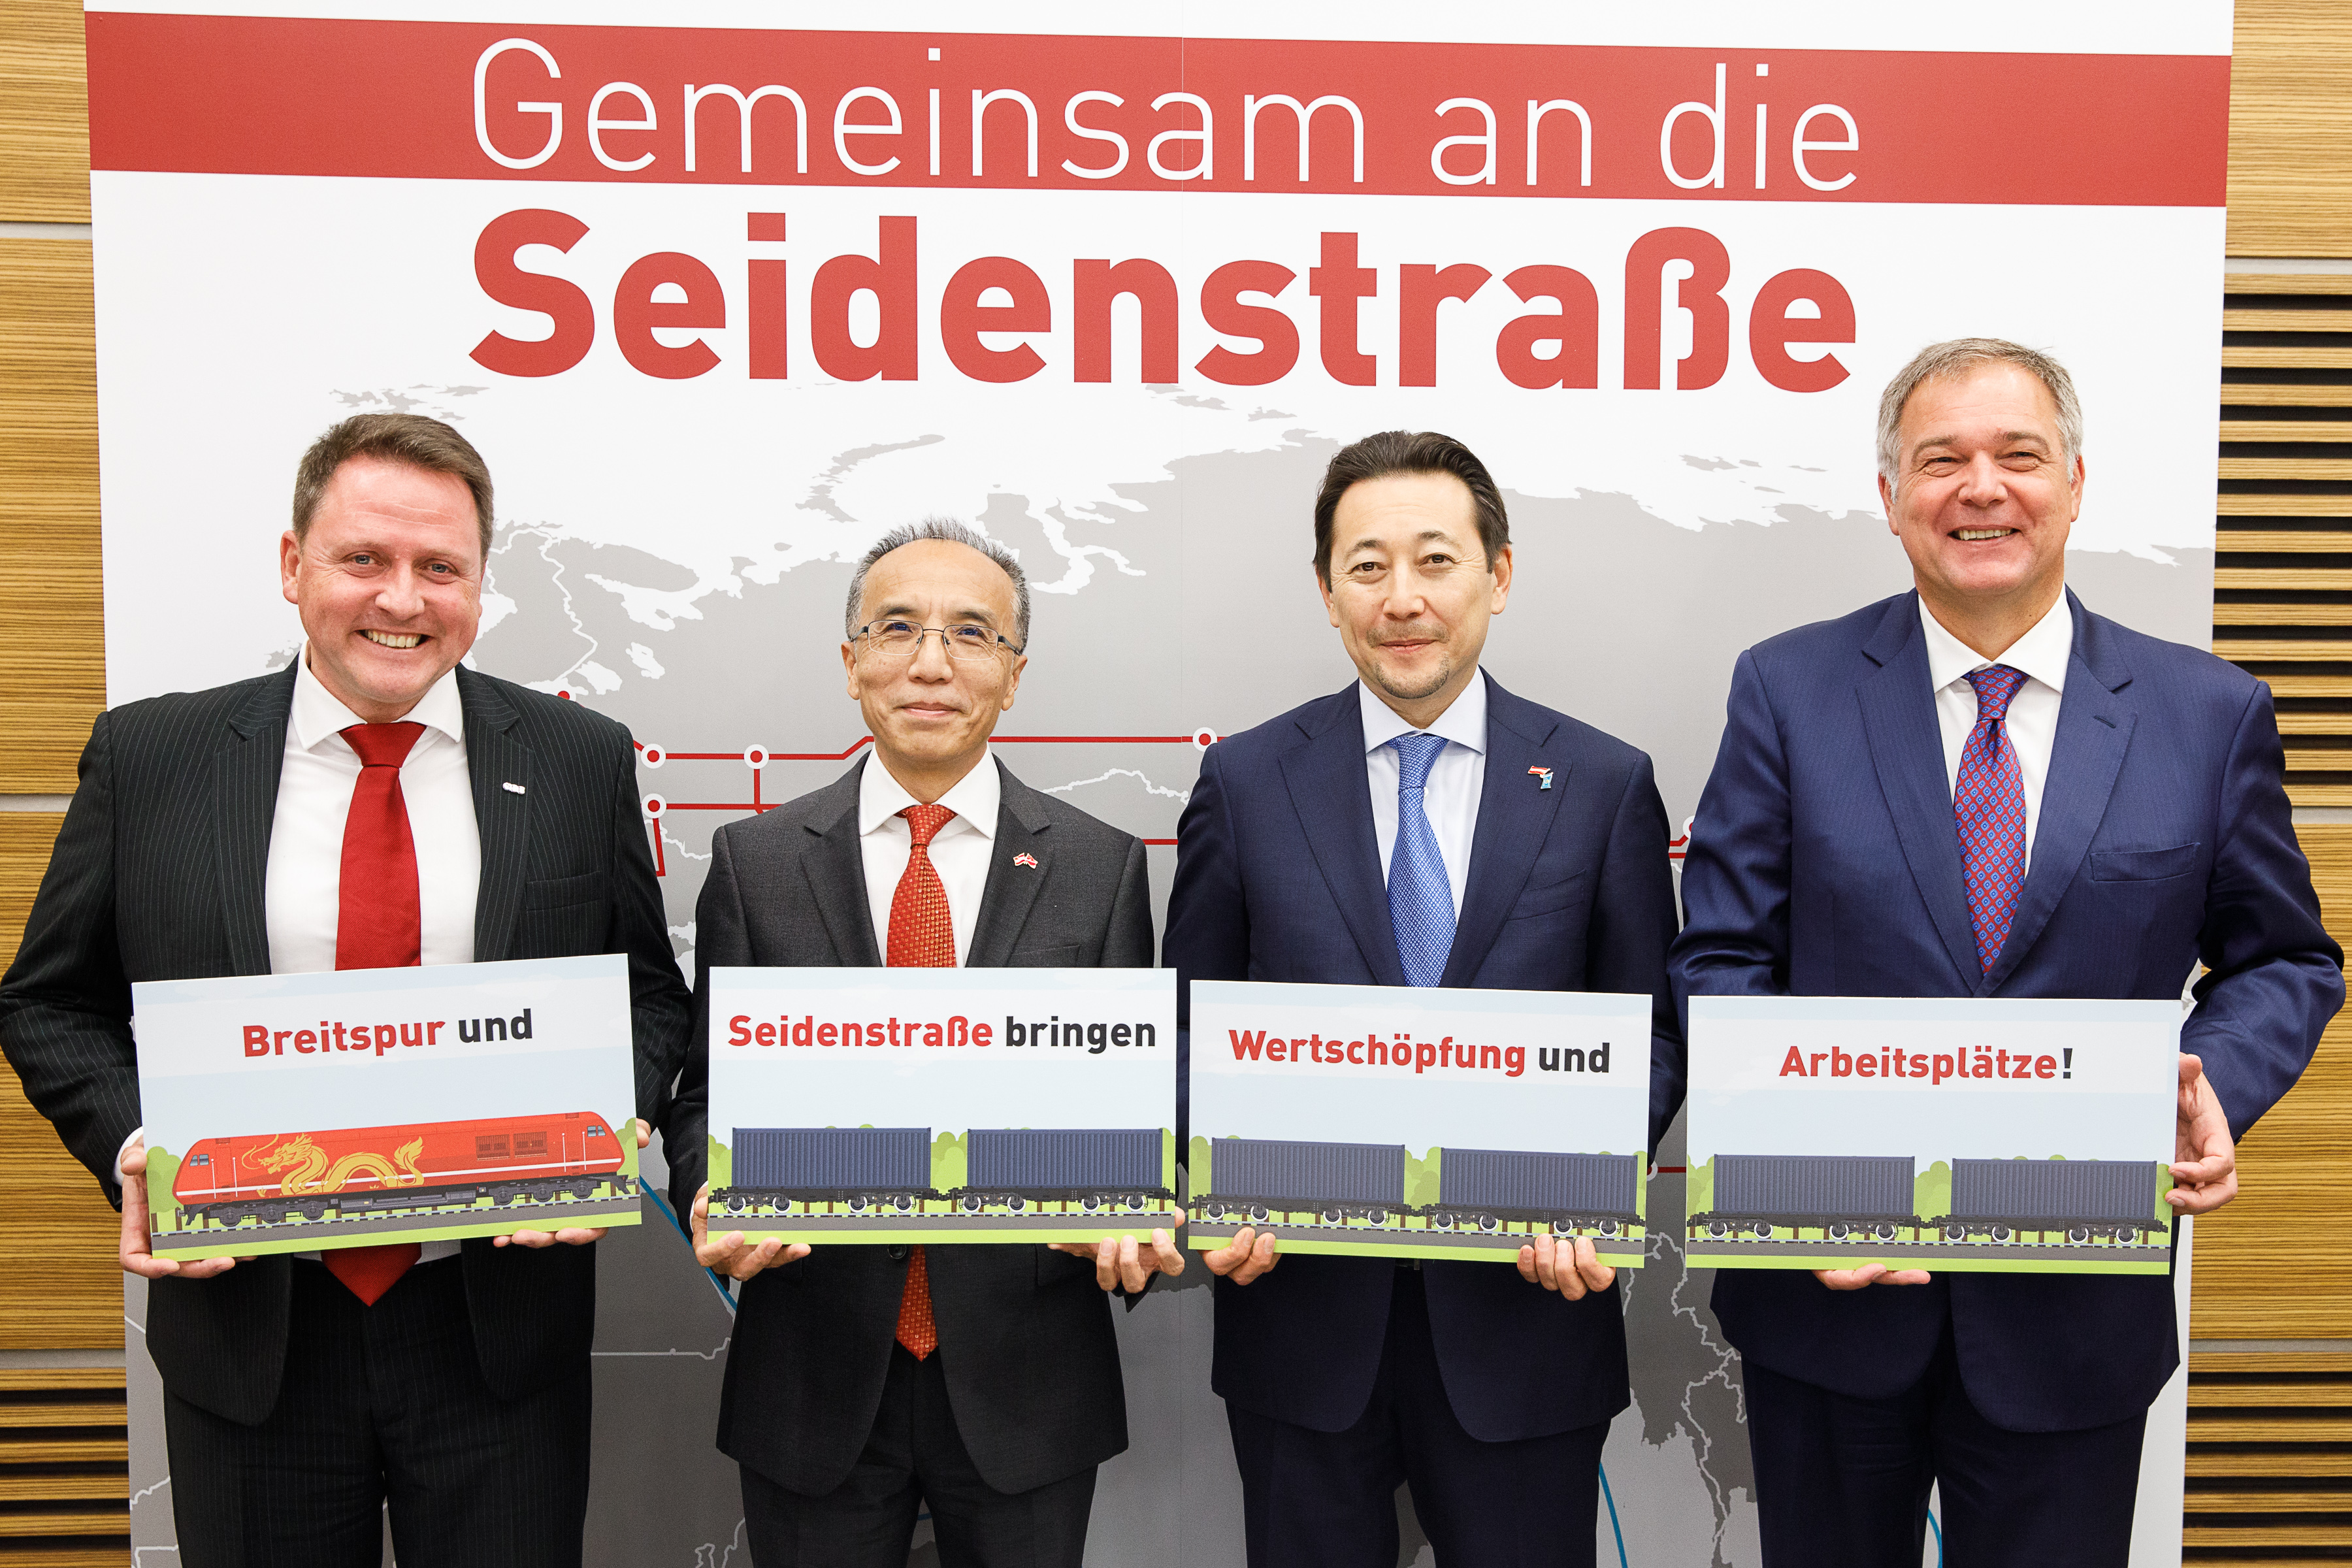 “New Silk Road is the opportunity of the century for Austria”